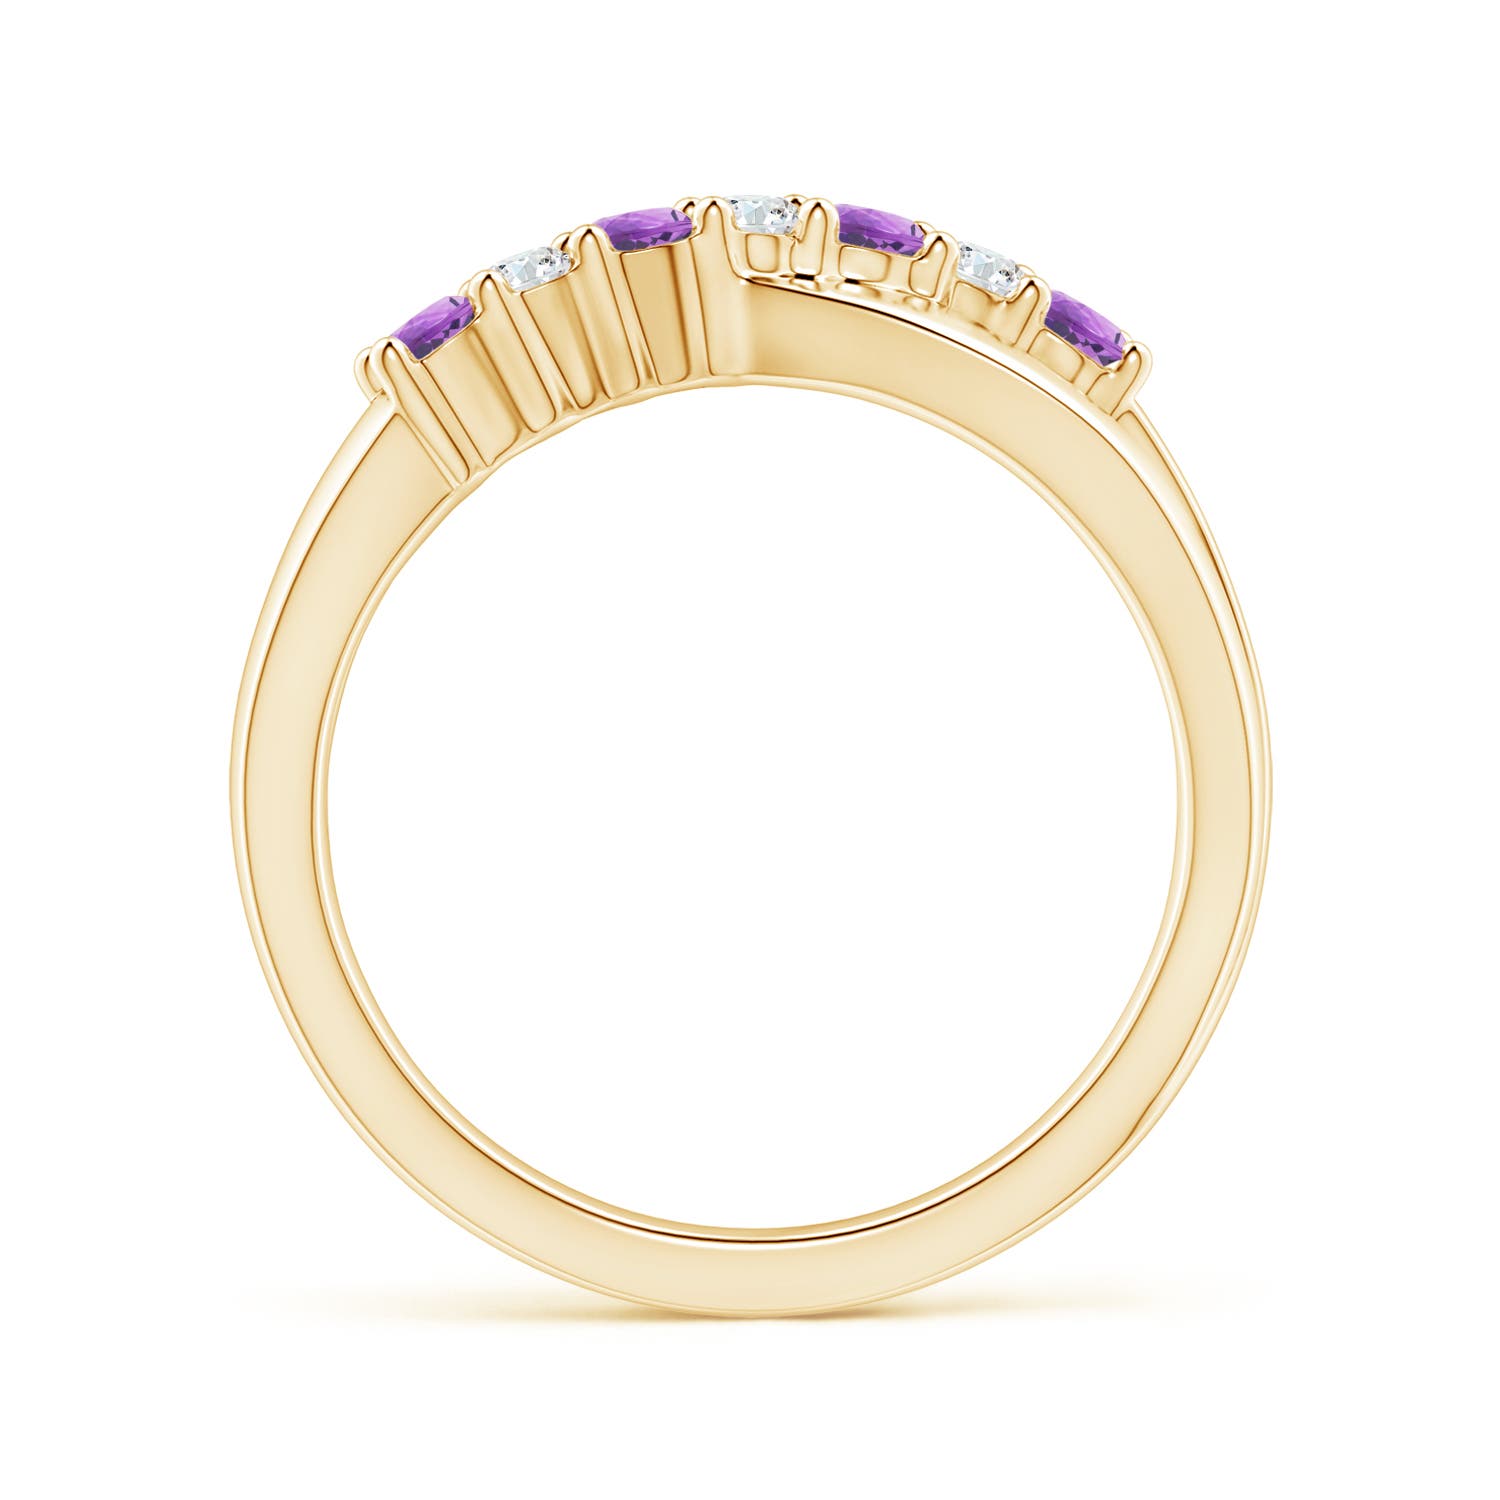 A - Amethyst / 0.36 CT / 14 KT Yellow Gold